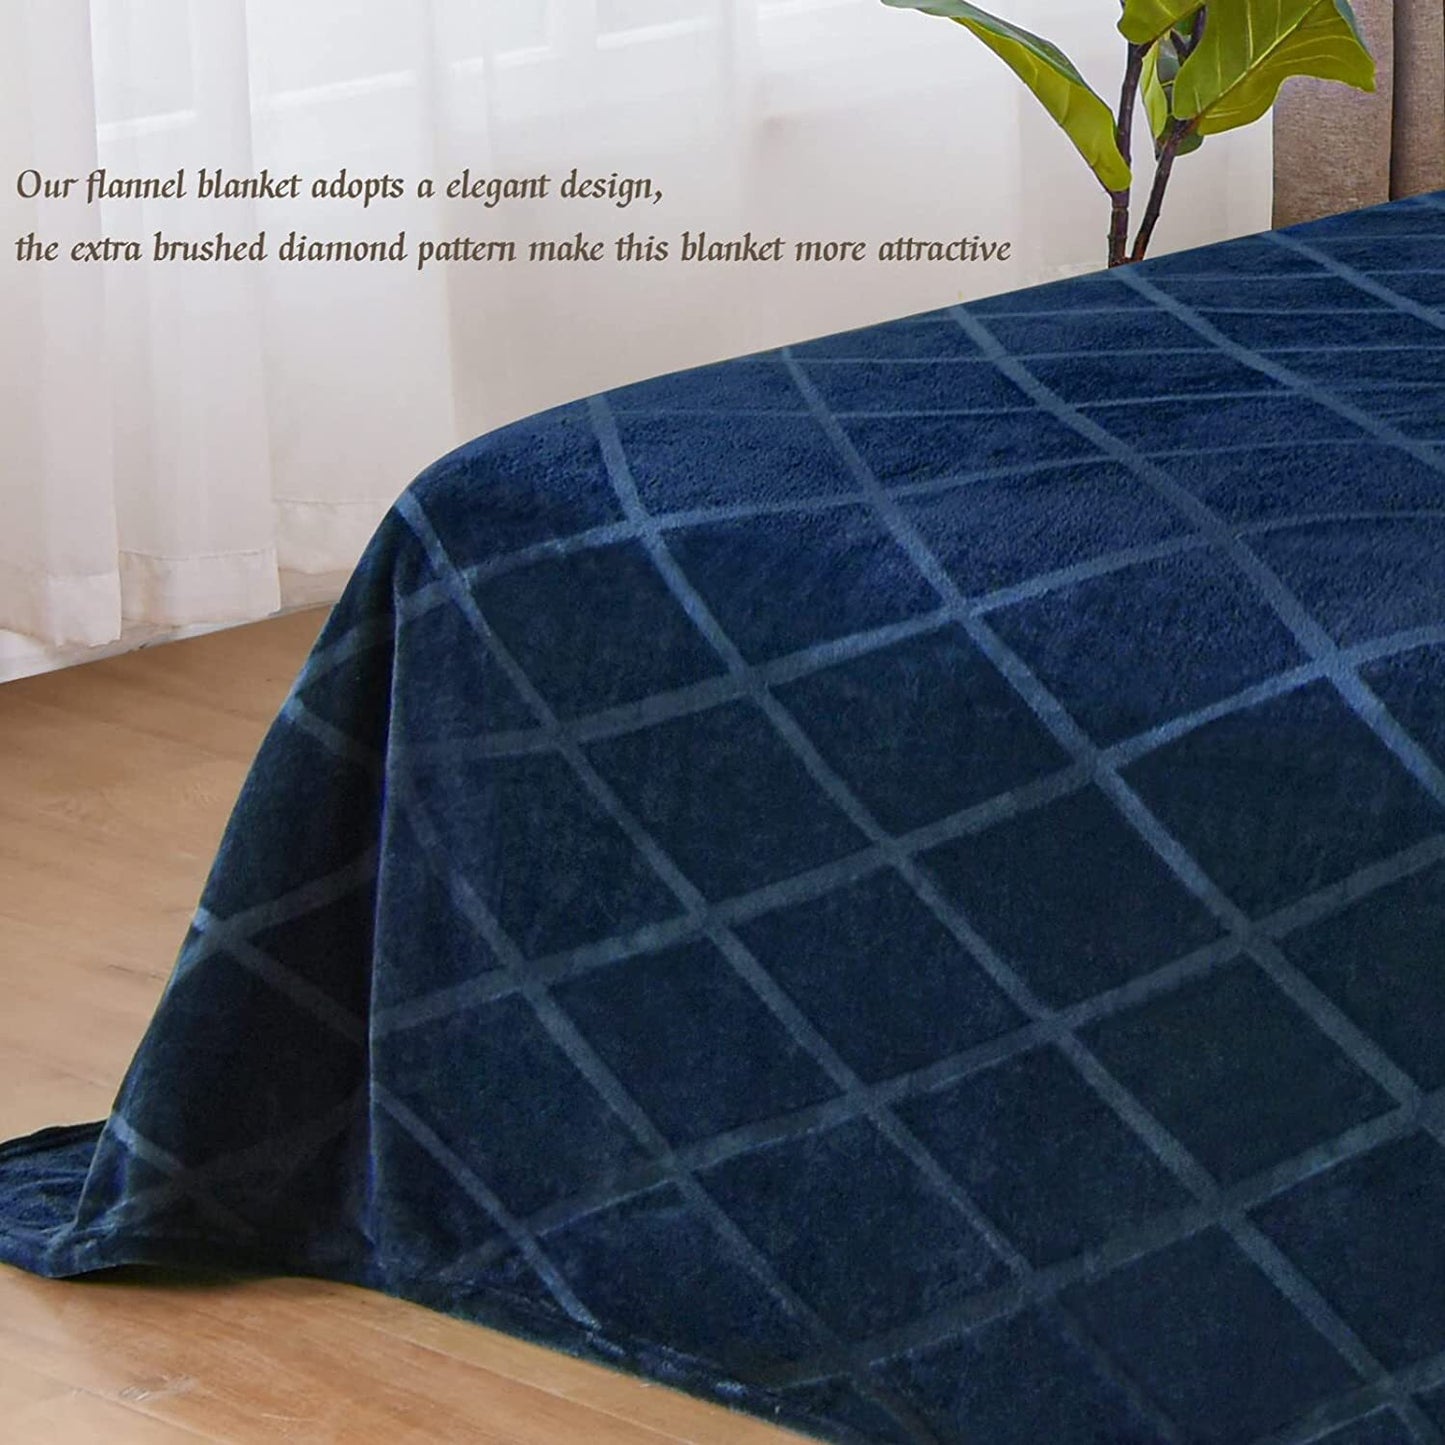 Exclusivo Mezcla King Size Flannel Fleece Blanket, 90x104 Inches Soft Diamond Geometry Pattern Velvet Plush Blanket for Bed, Cozy, Warm, Lightweight and Decorative Navy Blue Blanket